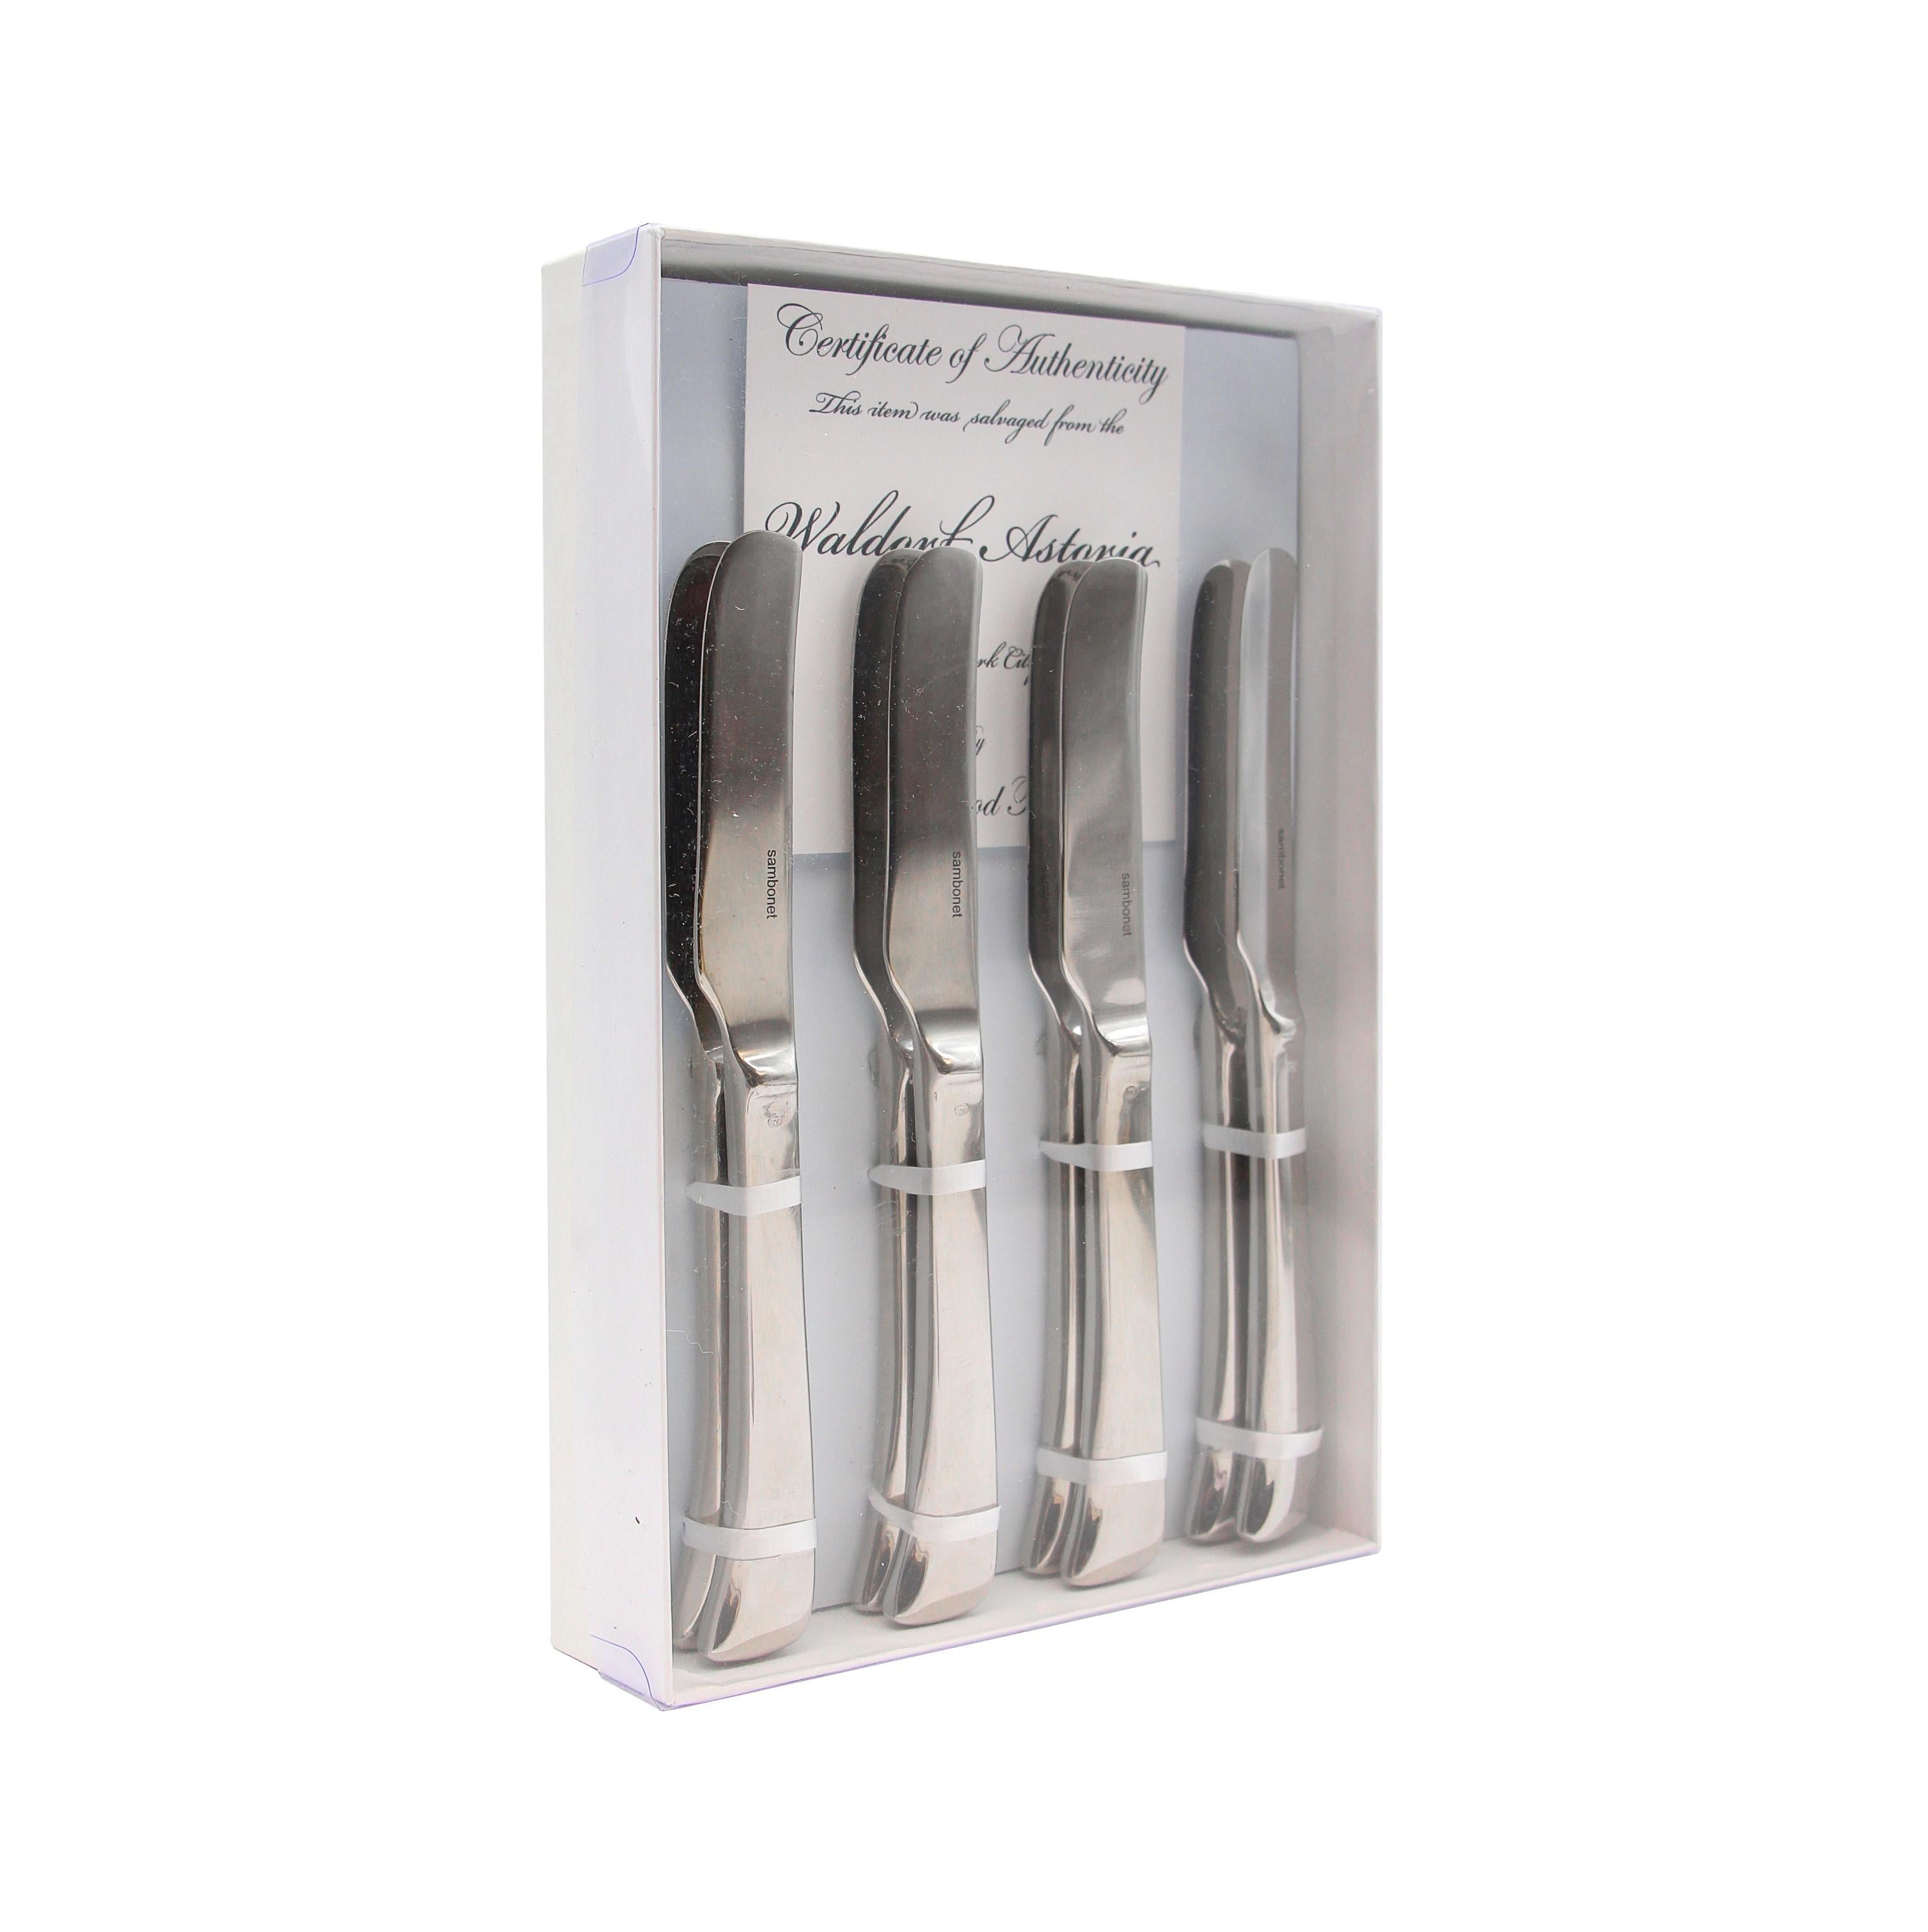 High quality stainless steel new butter knife flatware gift set. Made by Sambonet in their Imagine style. These pieces were backstock in the La Chin restaurant of the Waldorf Astoria Hotel on Park Ave in NYC. This set includes a Waldorf Astoria